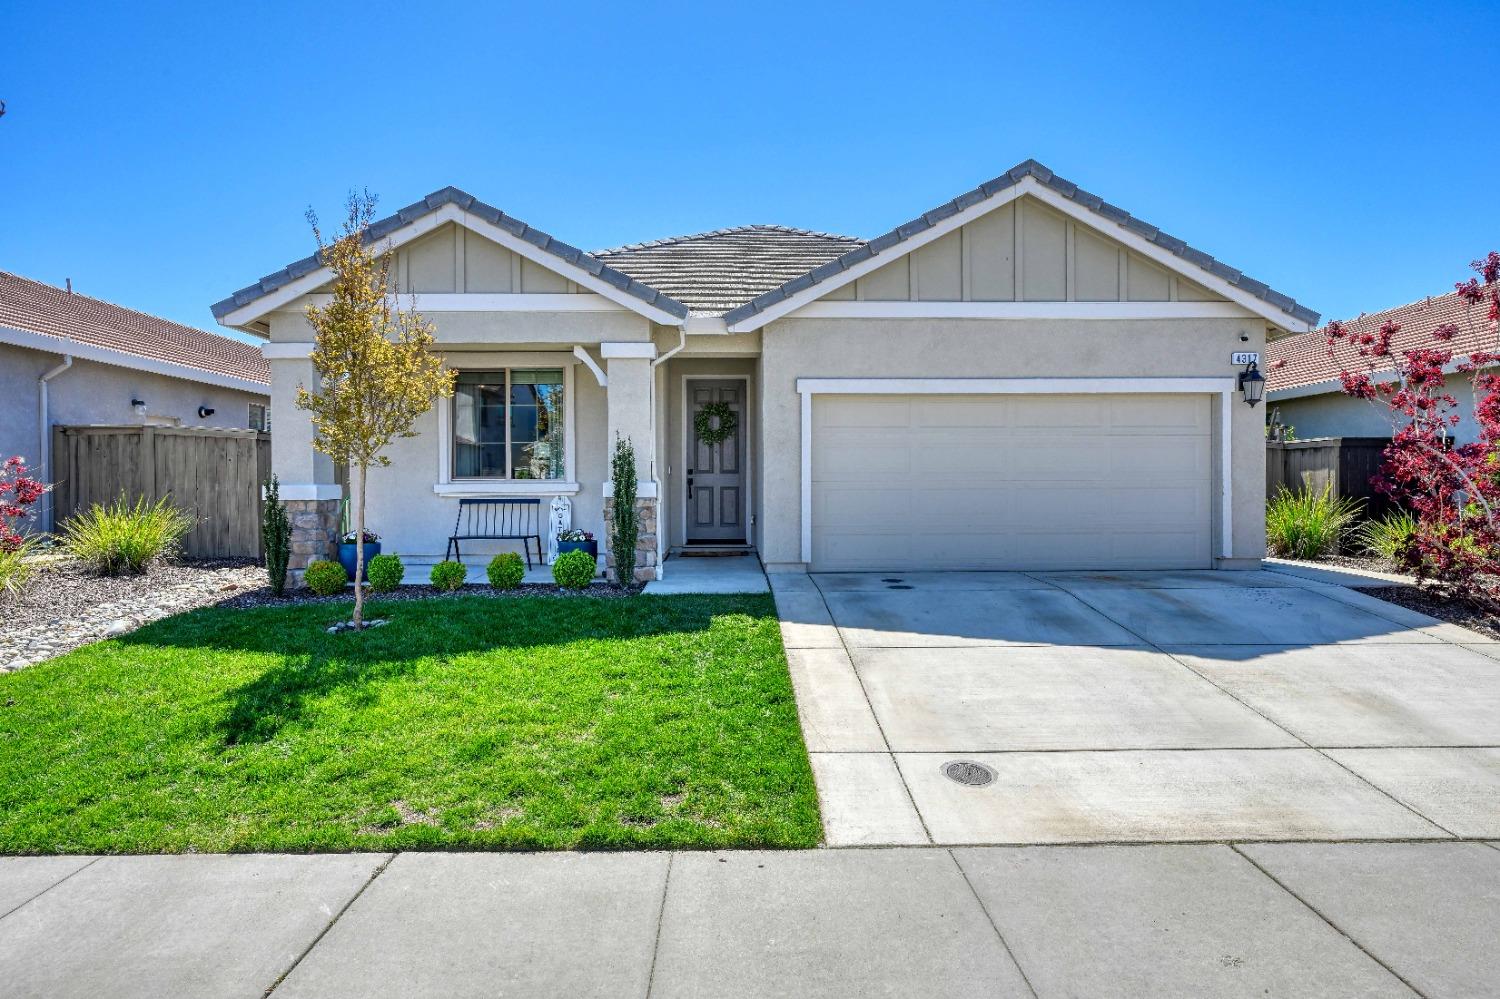 Photo of 4317 Crawford Pky in Roseville, CA